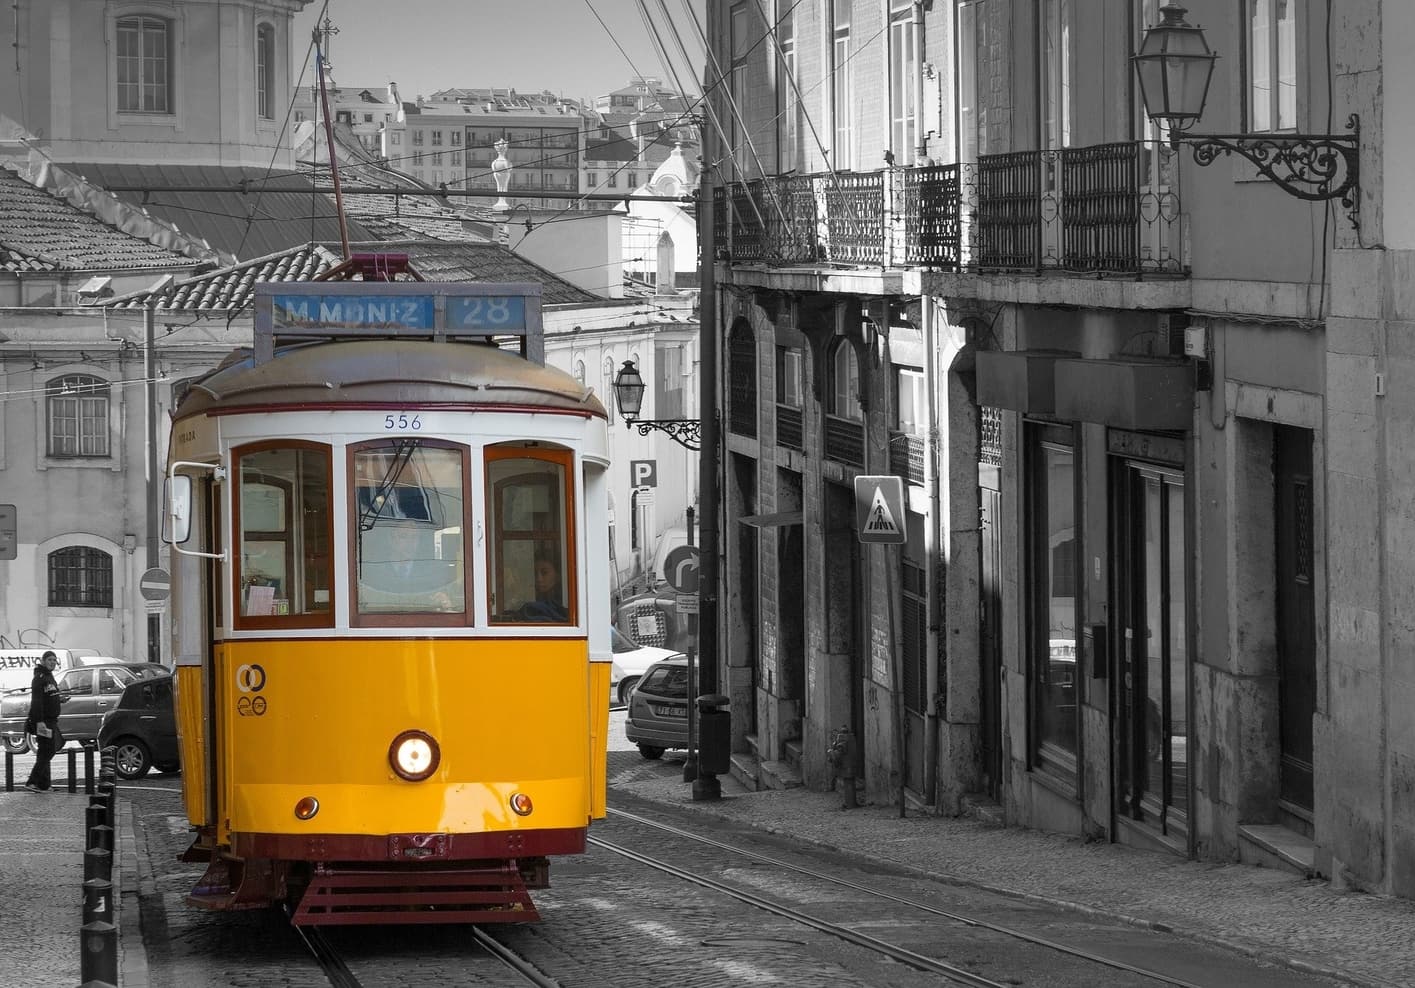 Take the Tram 28, a great activity to do in Lisbon